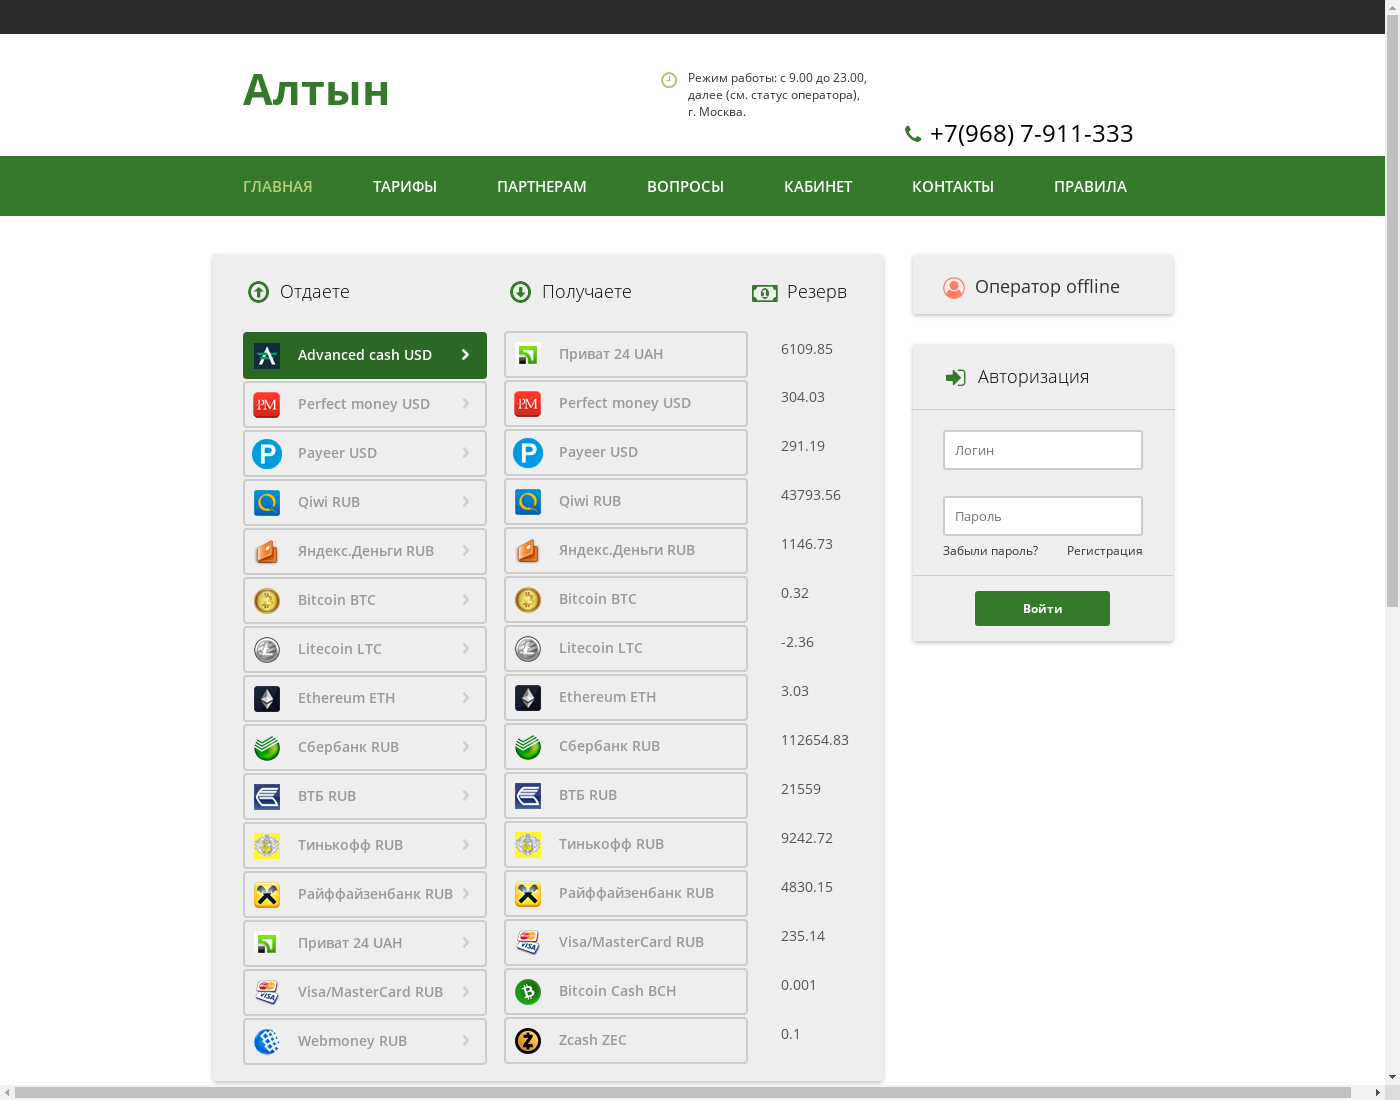 altin user interface: the home page in English